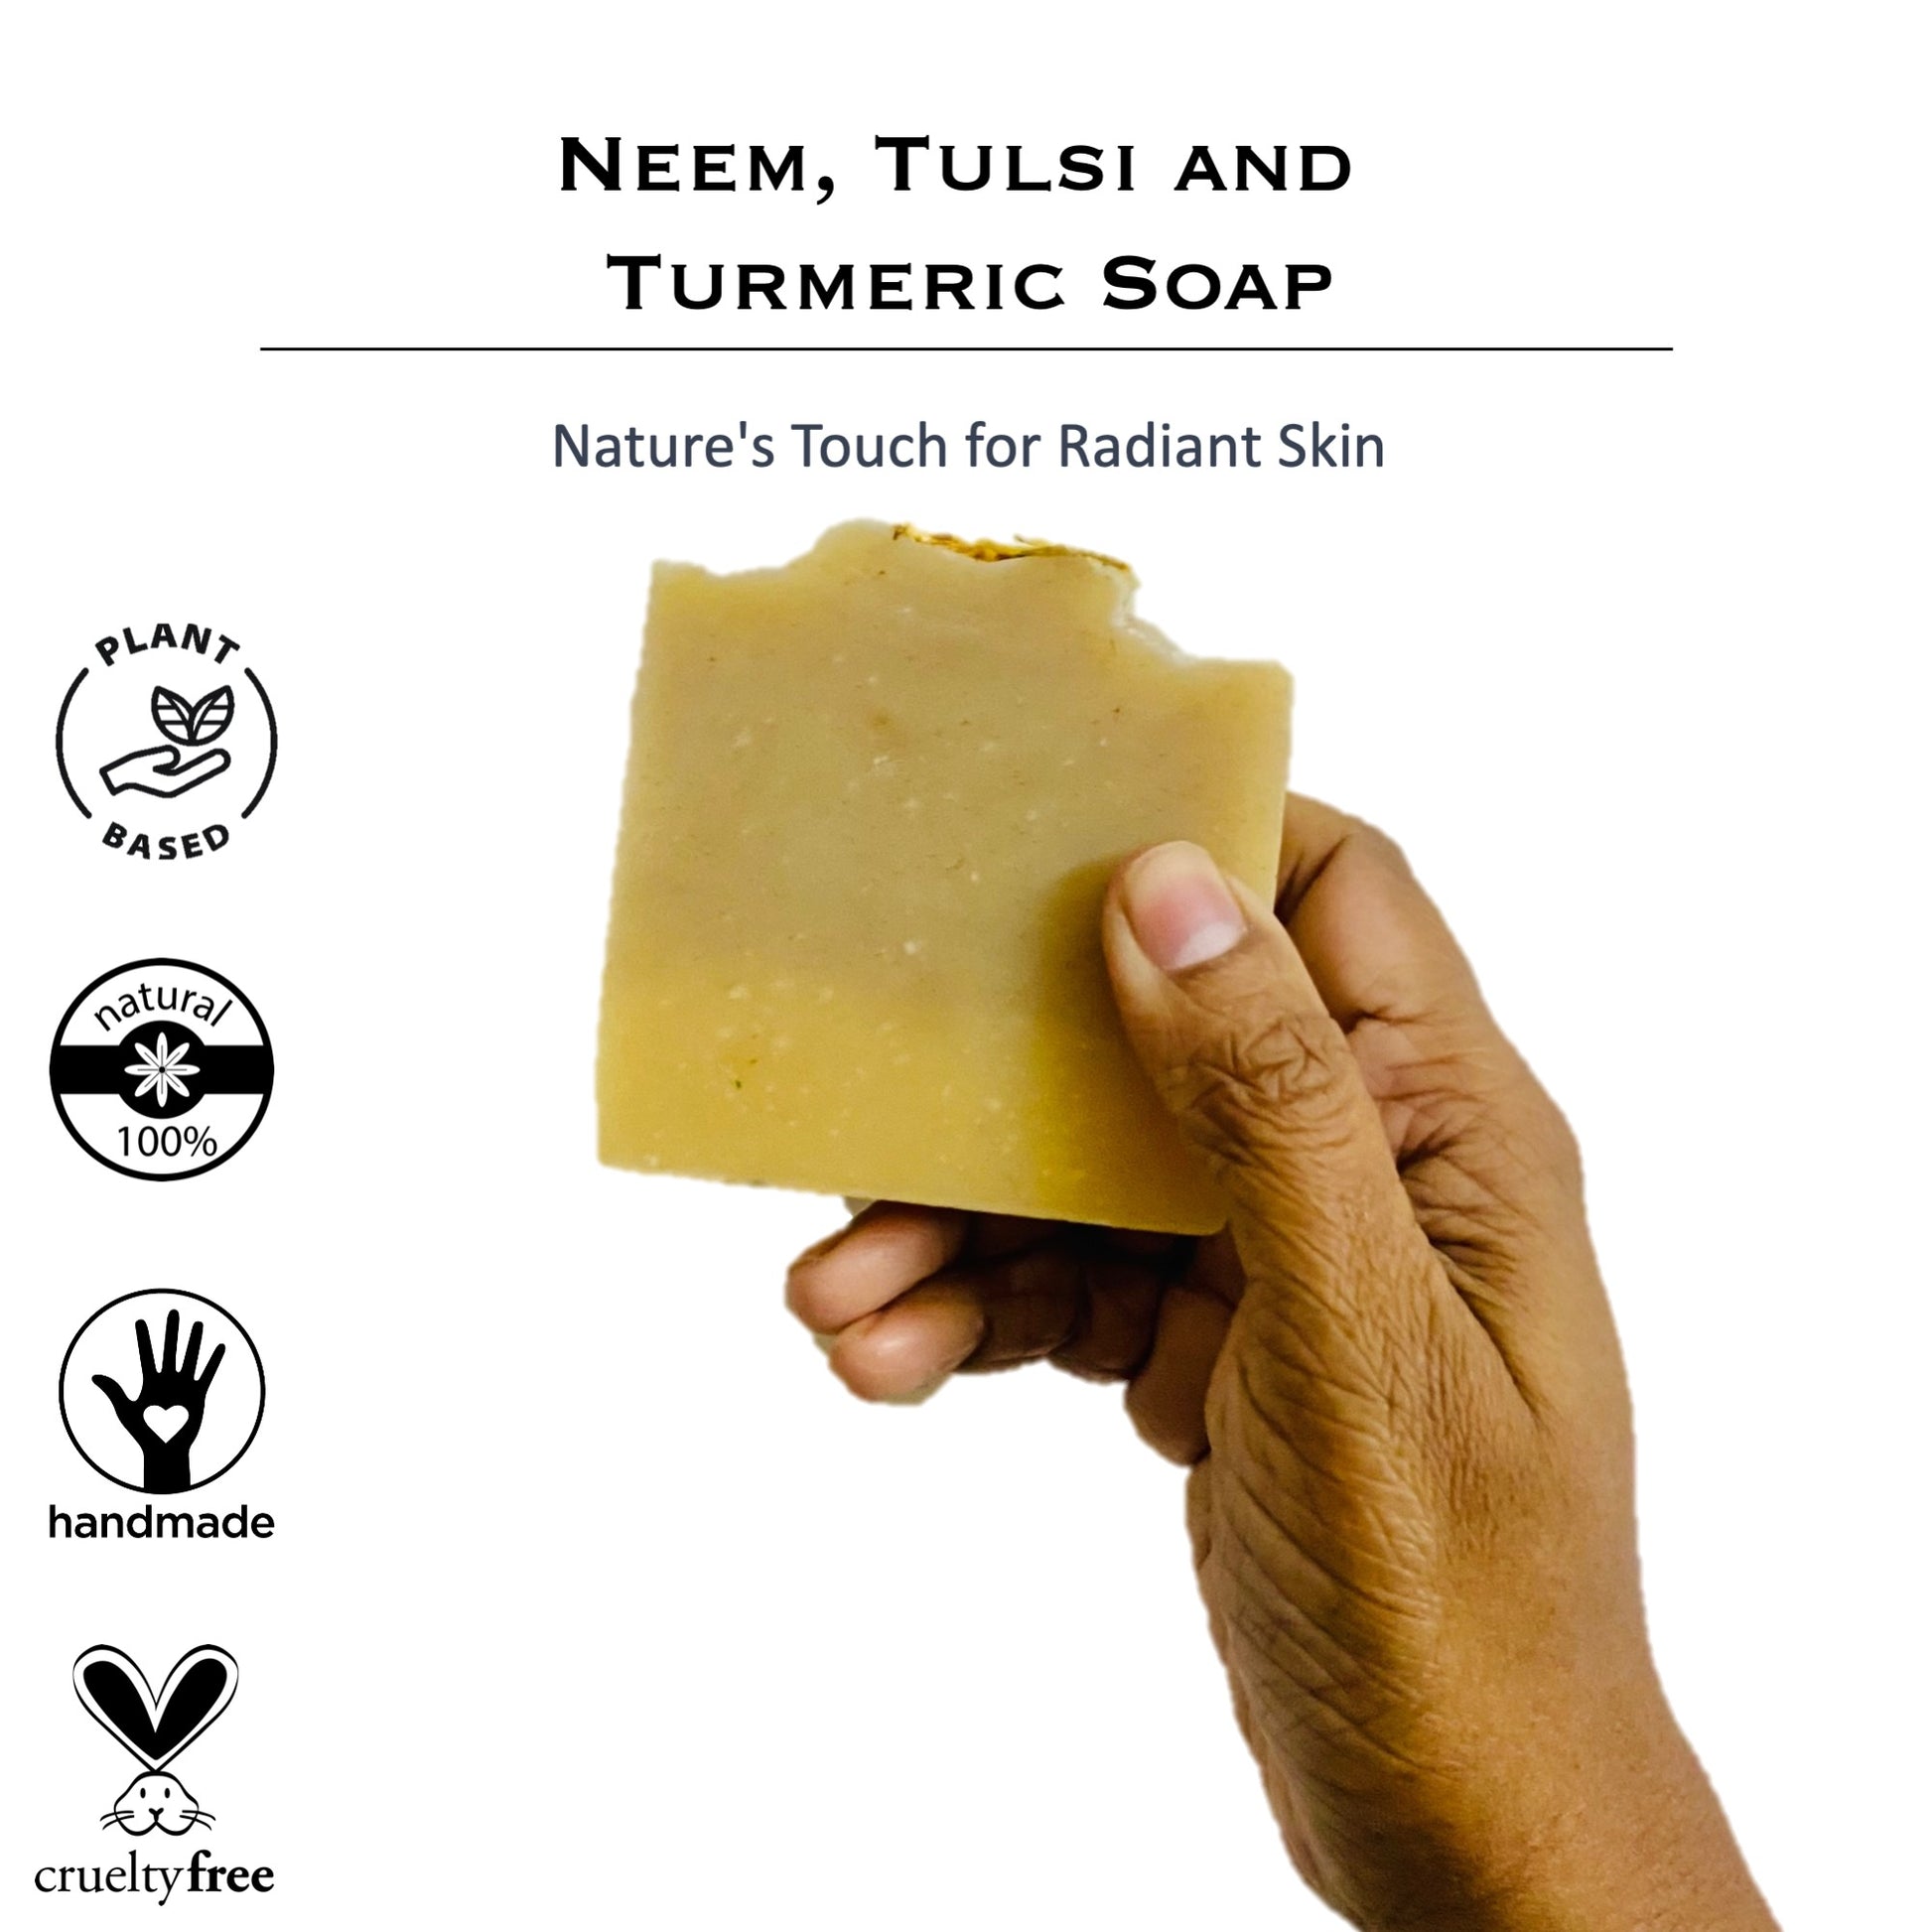 Tiarrah's Neem, Tulsi, and Turmeric Soap: Pure, Safe, Healing - The Luxury Bath and Body Care Shop